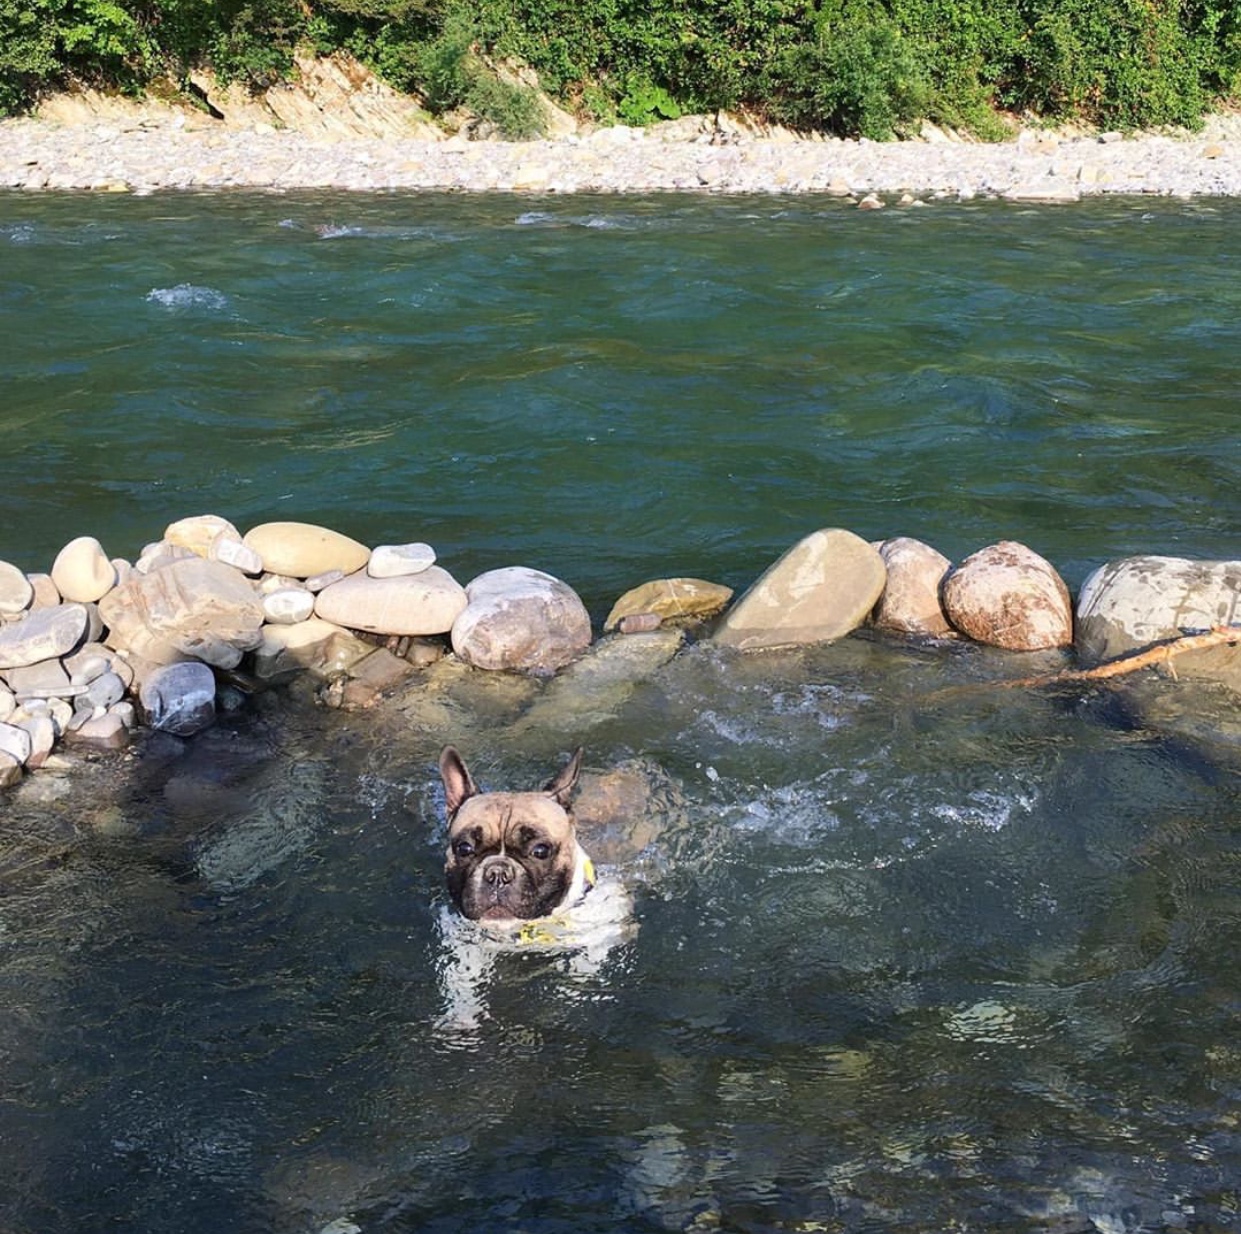 A French Bulldog swimming in the river